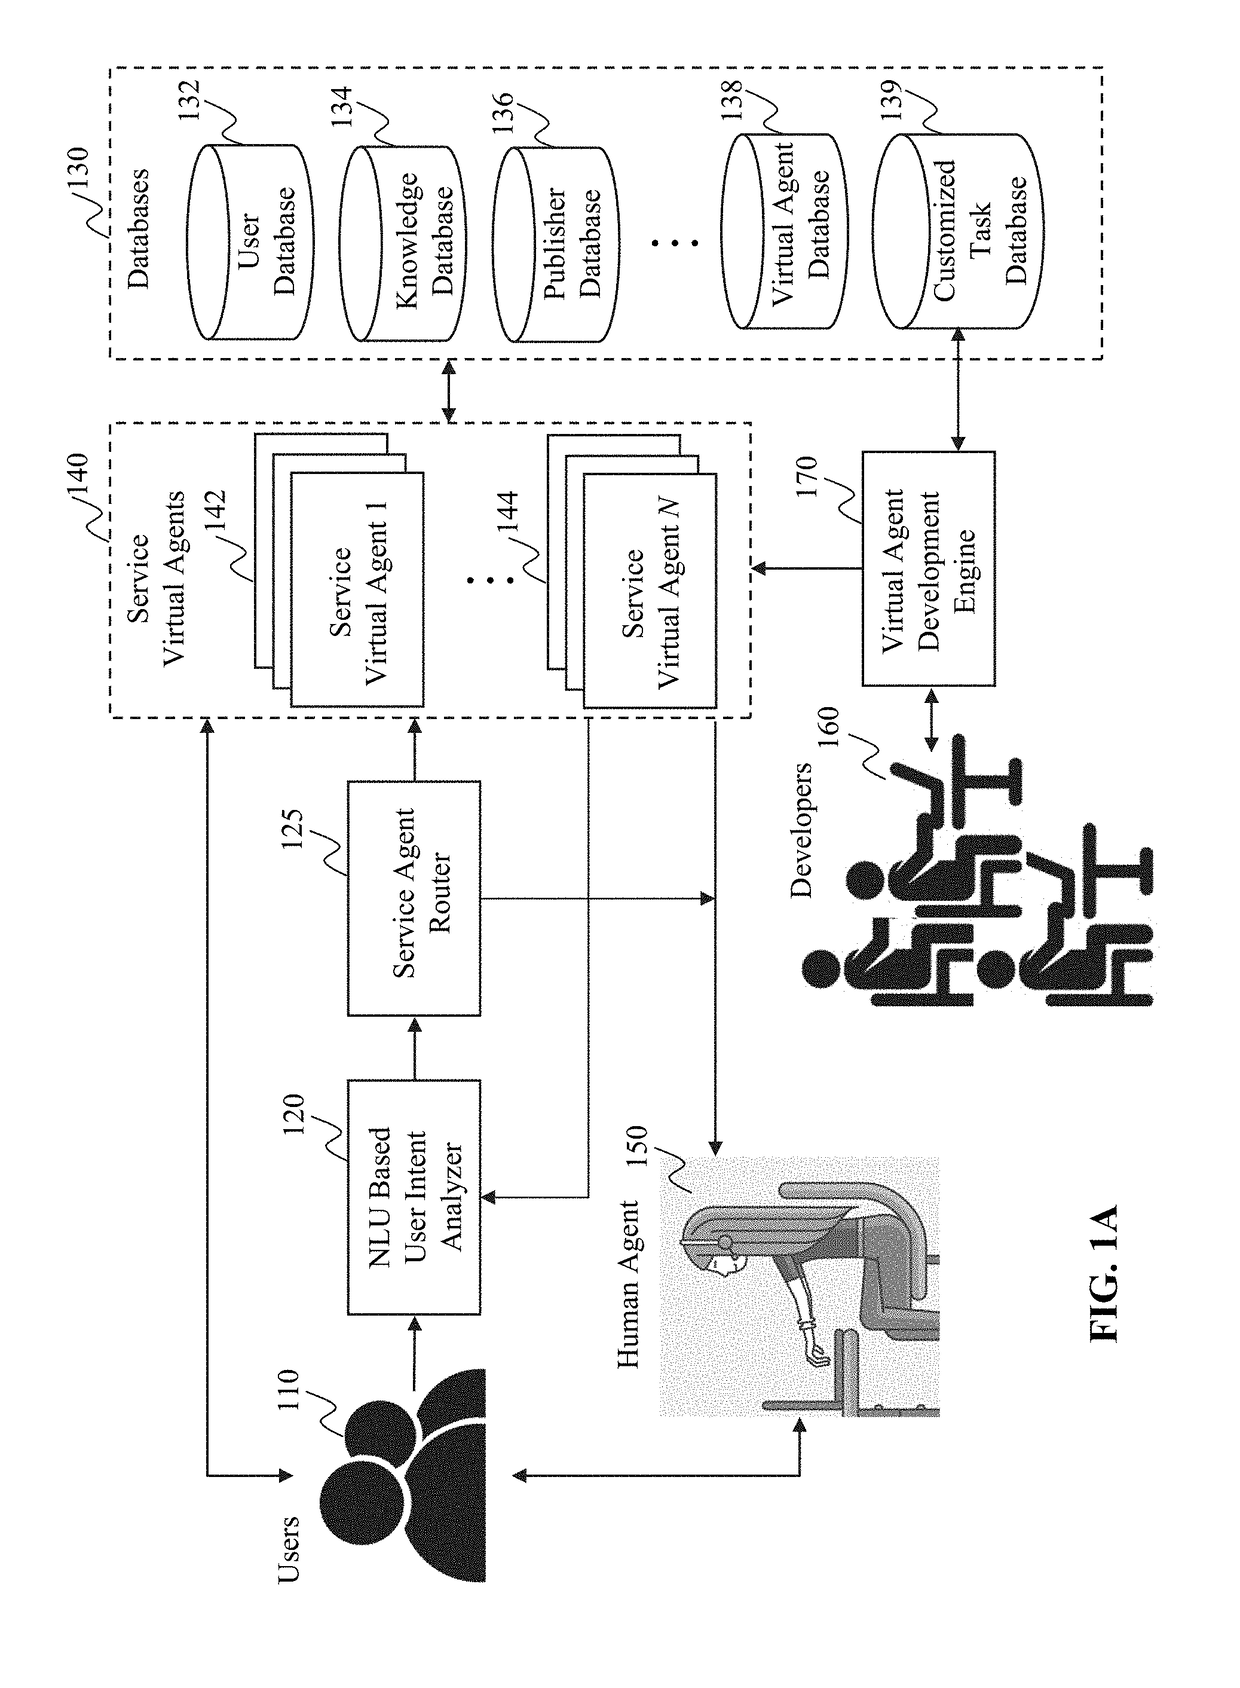 Method and system for semi-supervised learning in generating knowledge for intelligent virtual agents